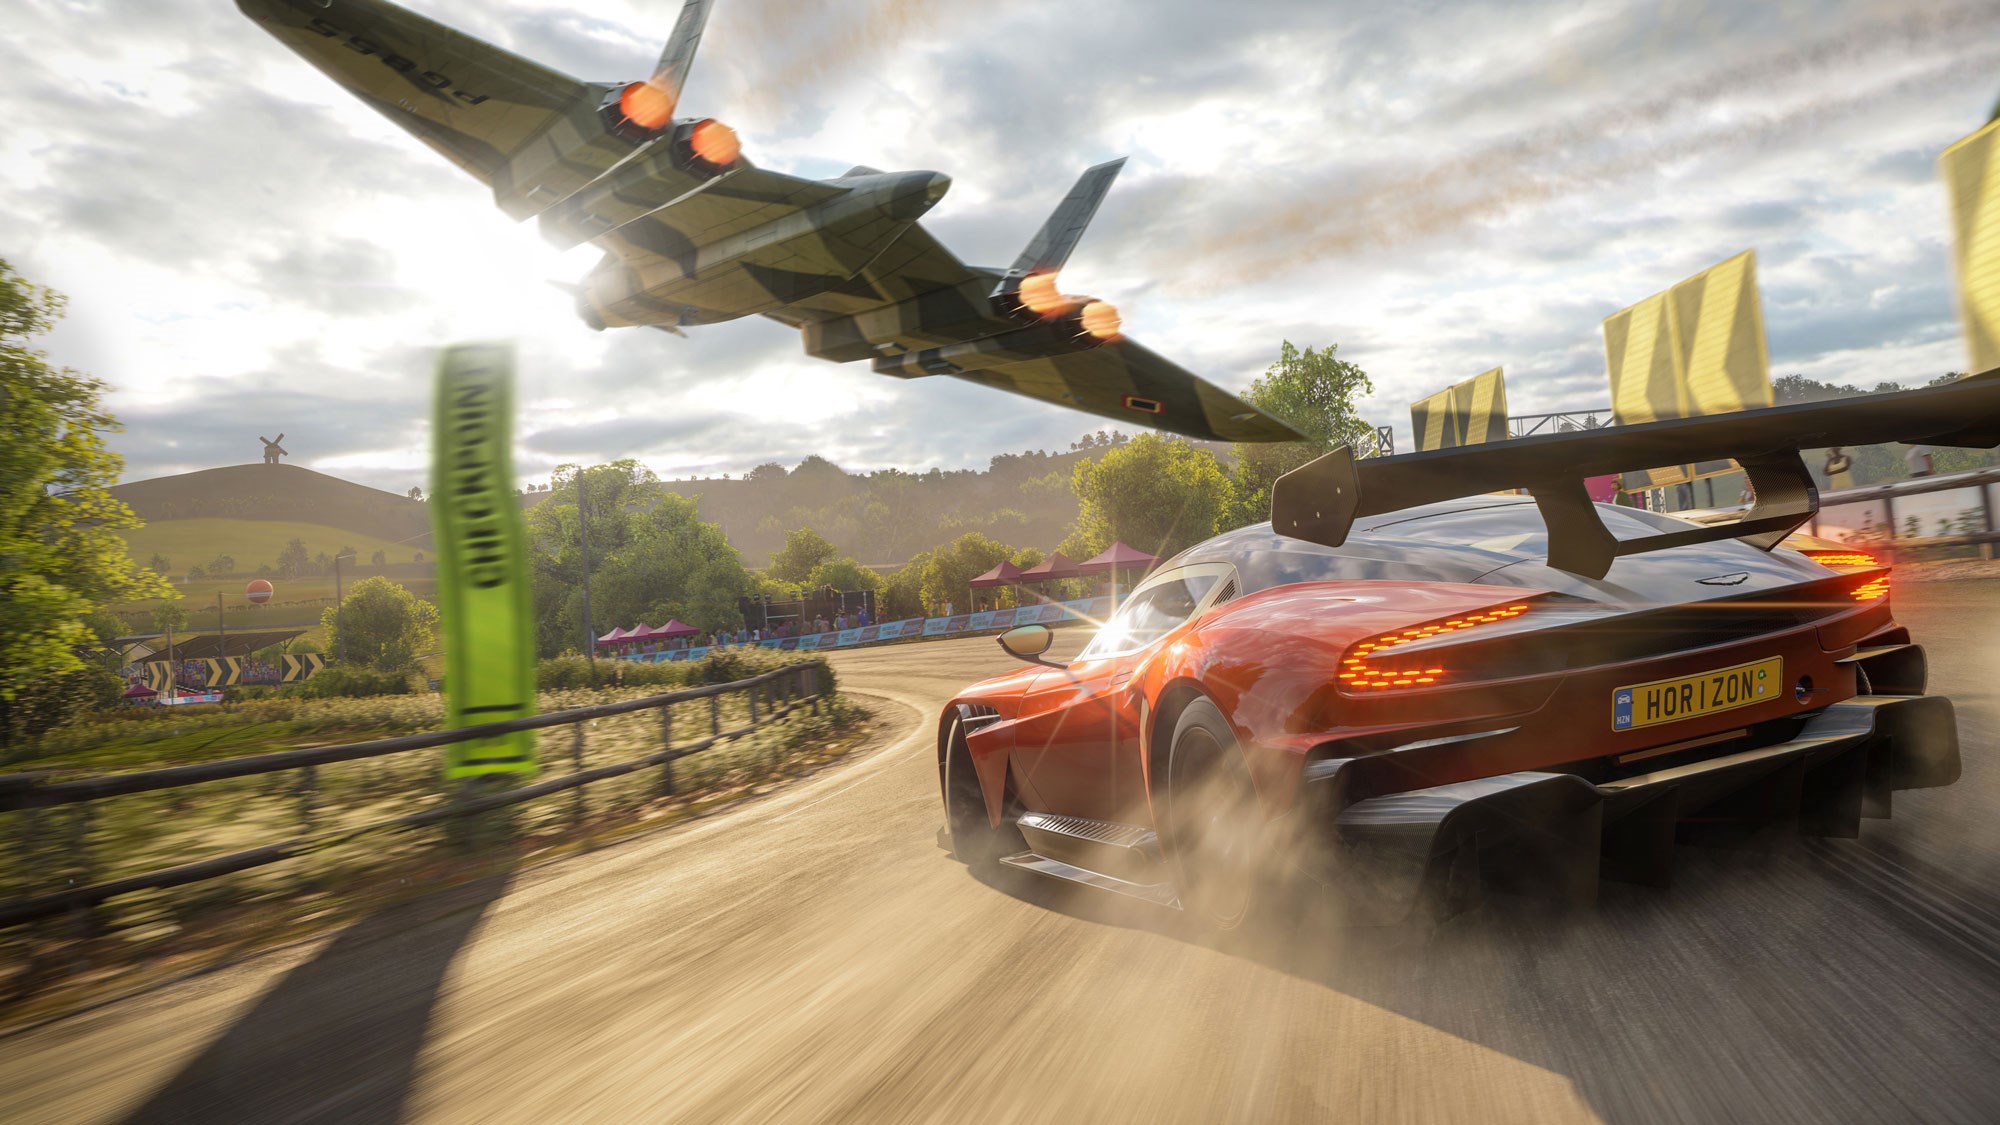 Forza Horizon 4 review (Xbox One): open-world racing at its best